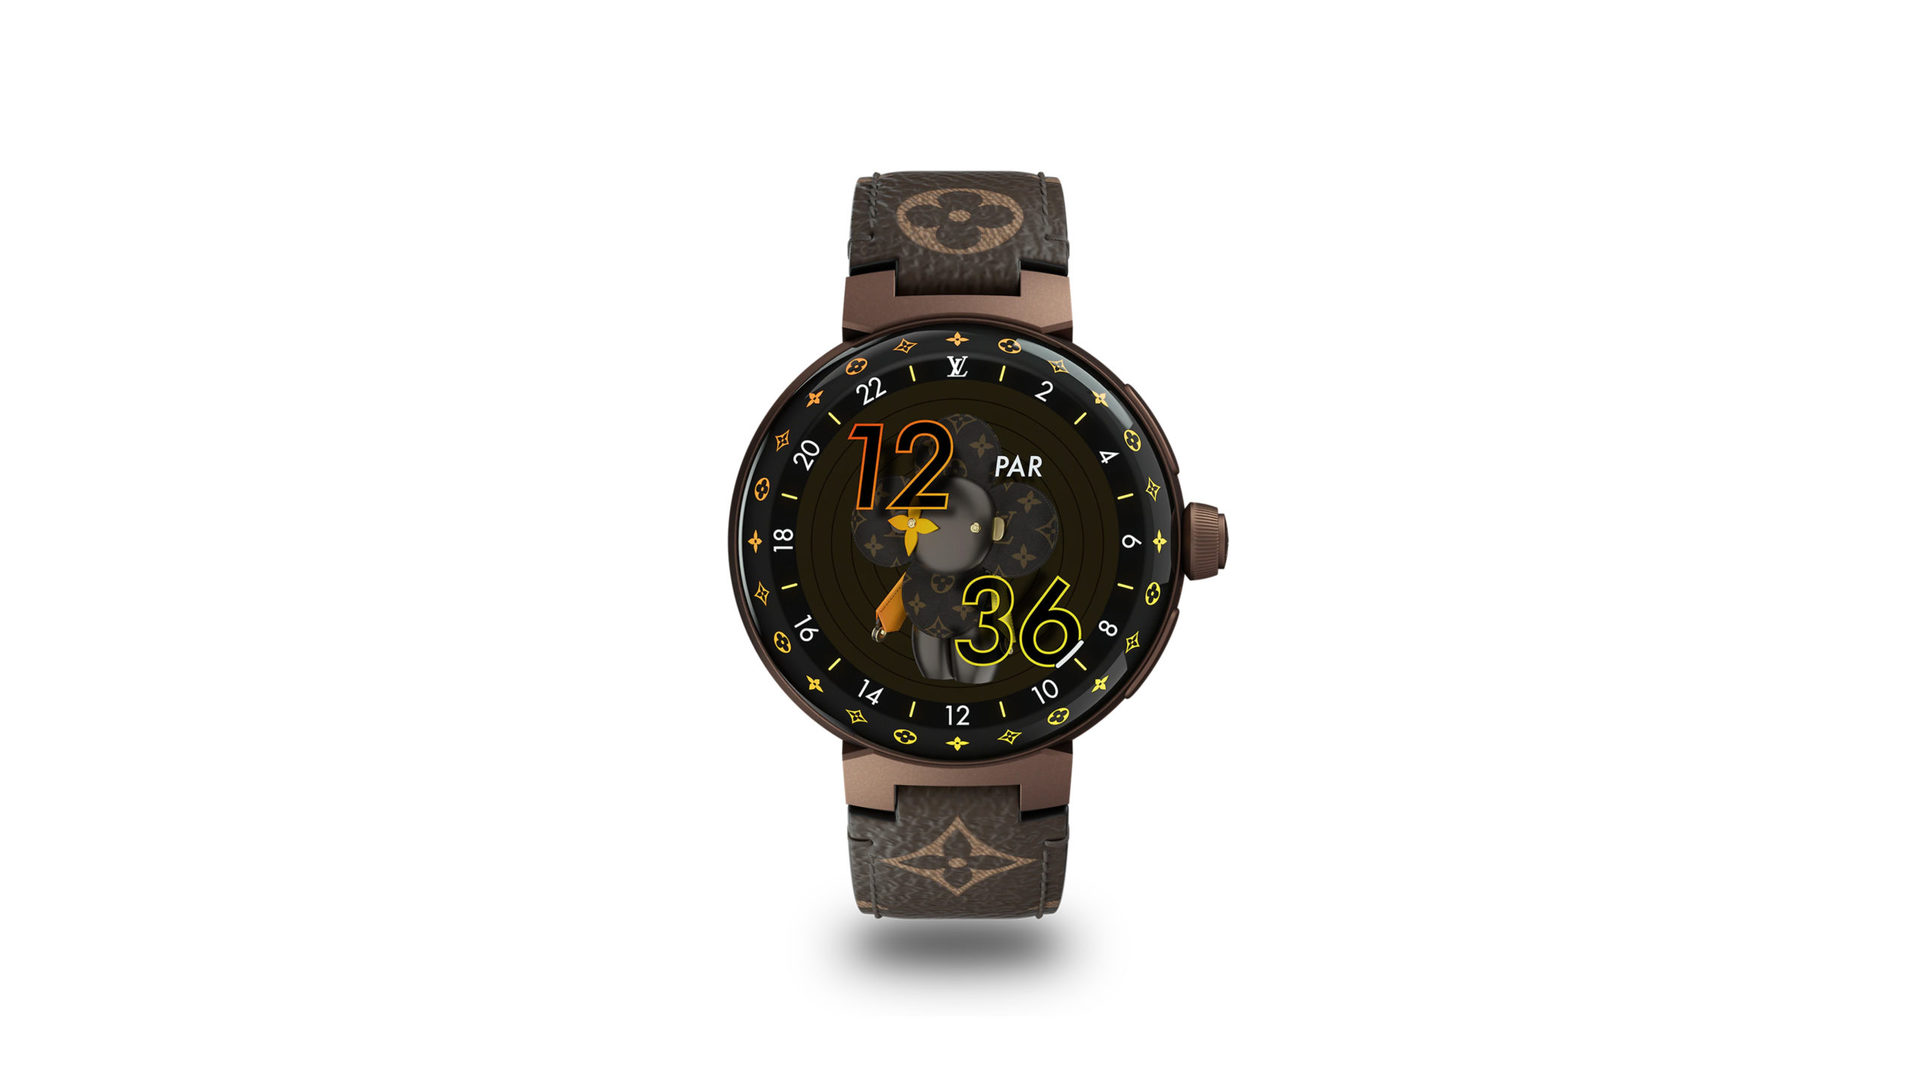 A product image of a Louis Vuitton Tambour Horizon Light Up Connected smartwatch.